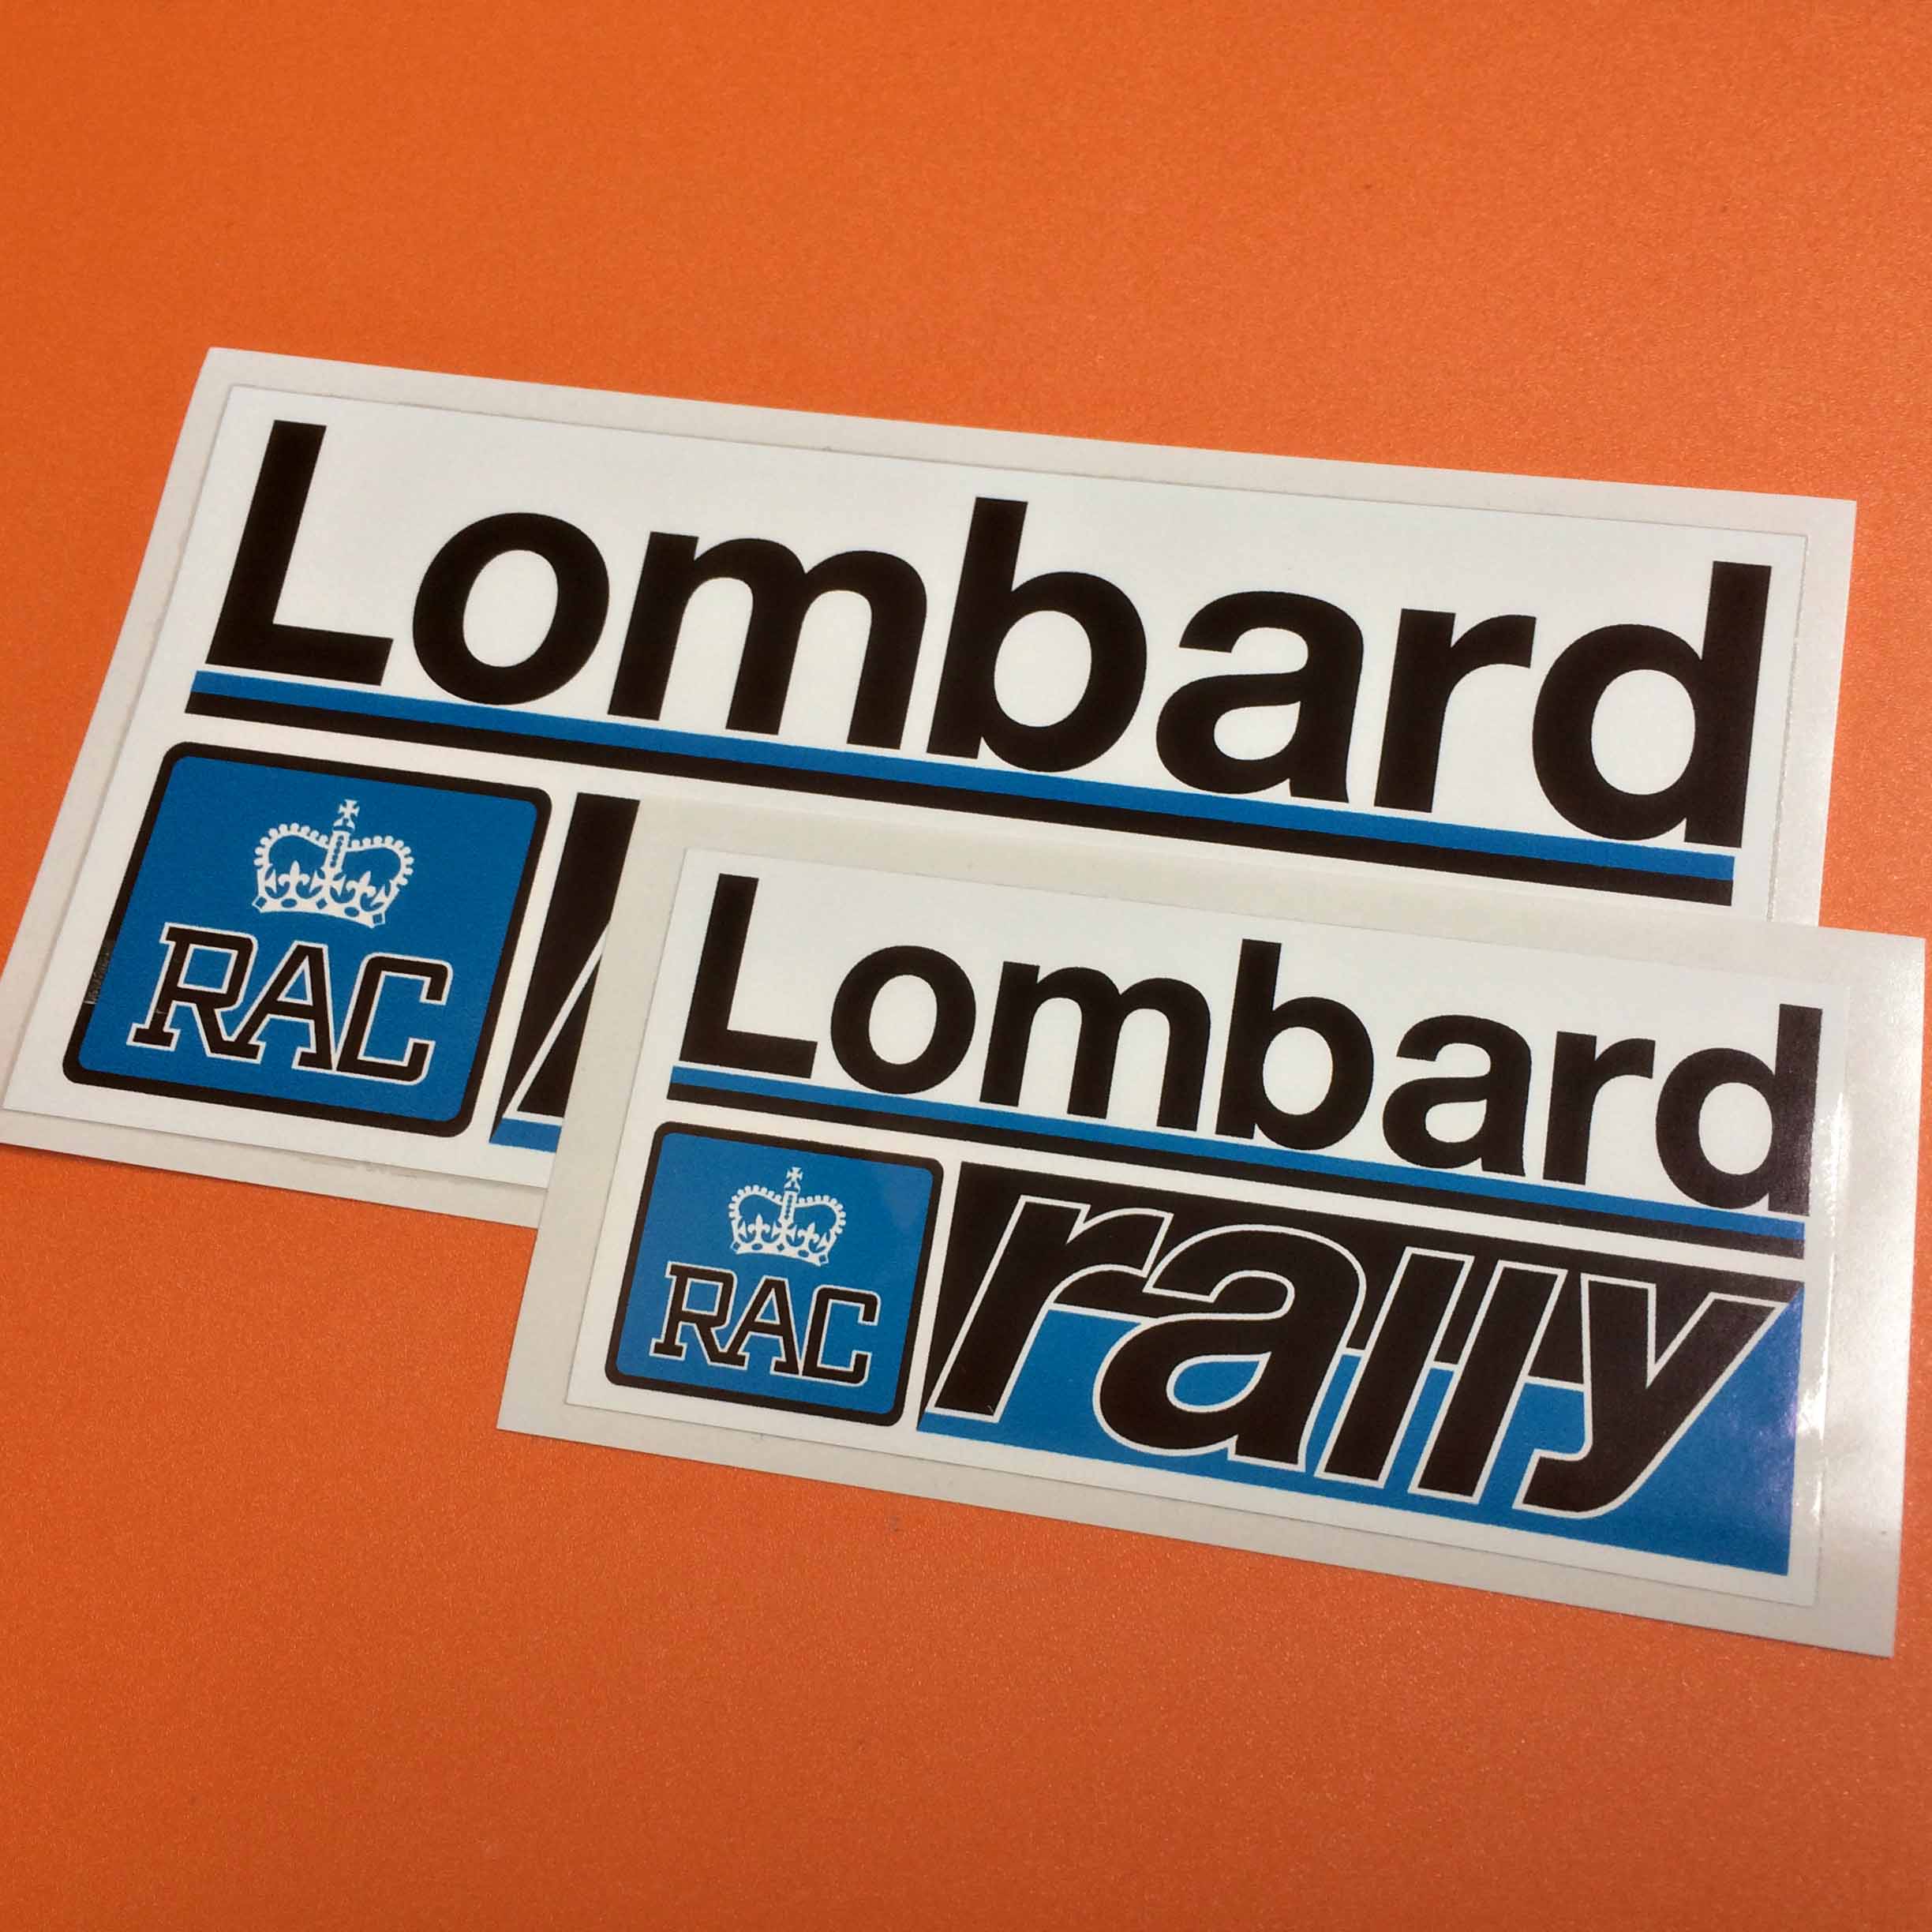 LOMBARD RAC RALLY STICKERS. Lombard in bold lettering. Rally below right on a rectangular background in two colours. Left of this RAC and a crown encased in a square.